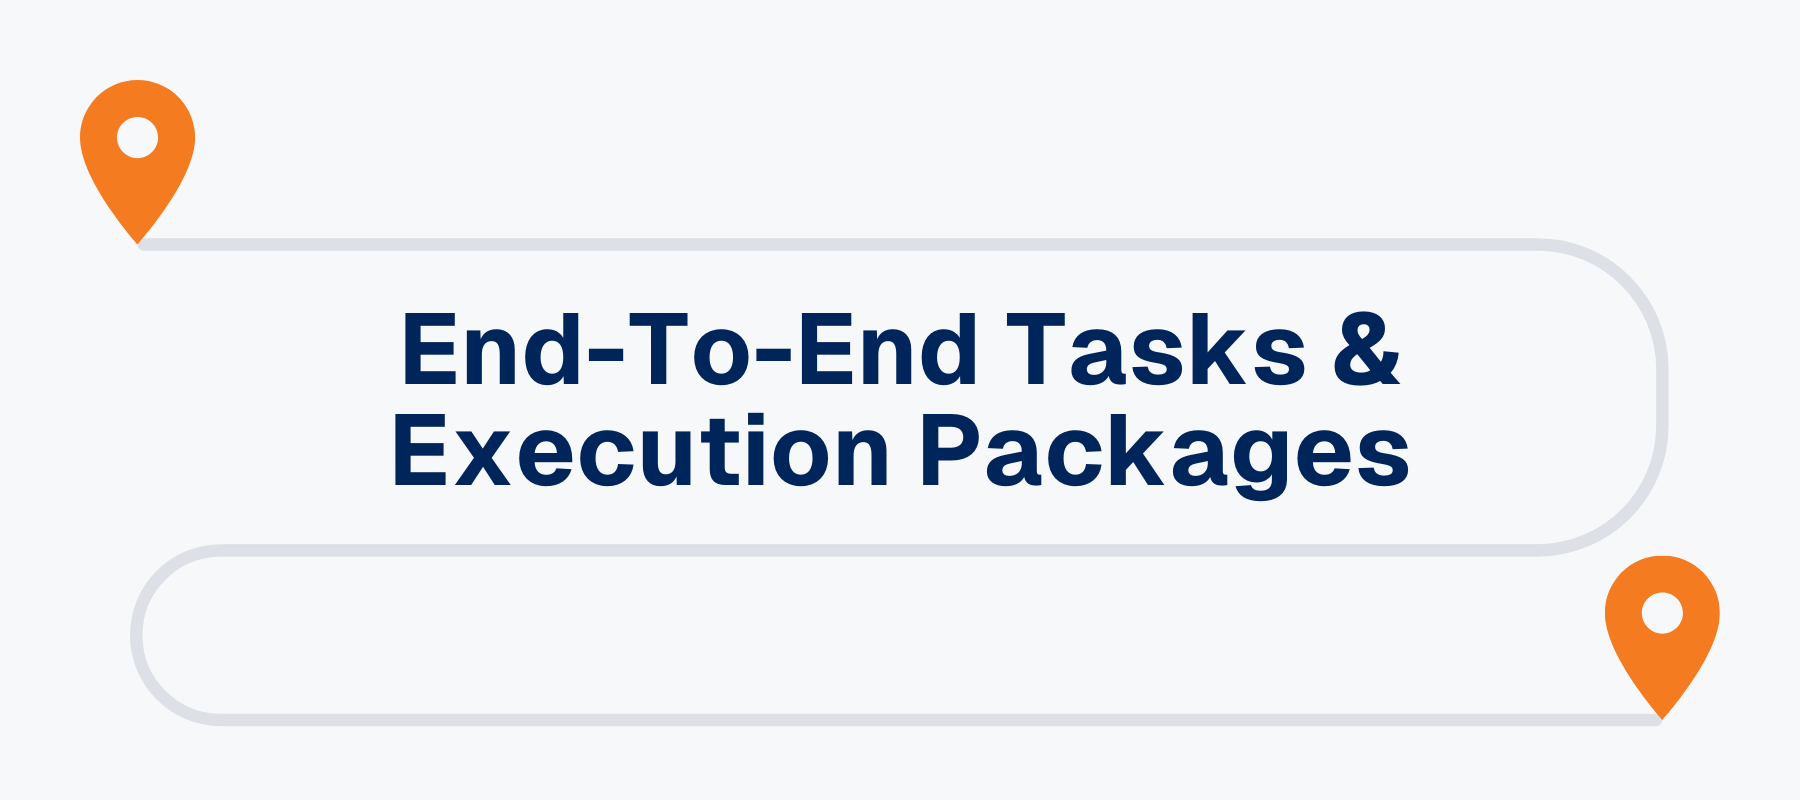 Generate End-To-End Tasks and Execution Packages